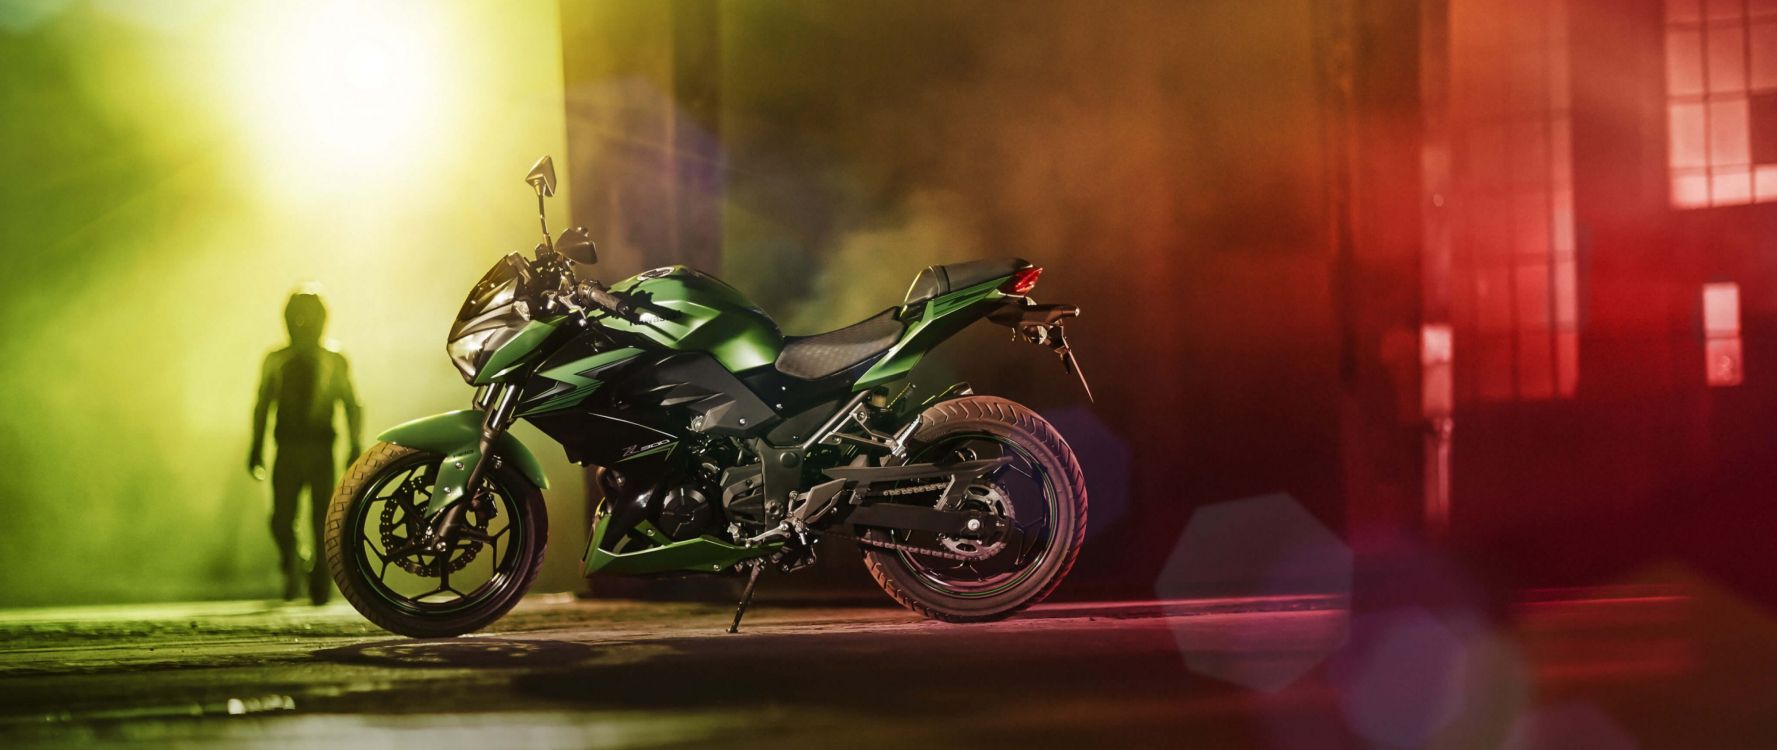 Green and Black Sports Bike. Wallpaper in 5120x2160 Resolution